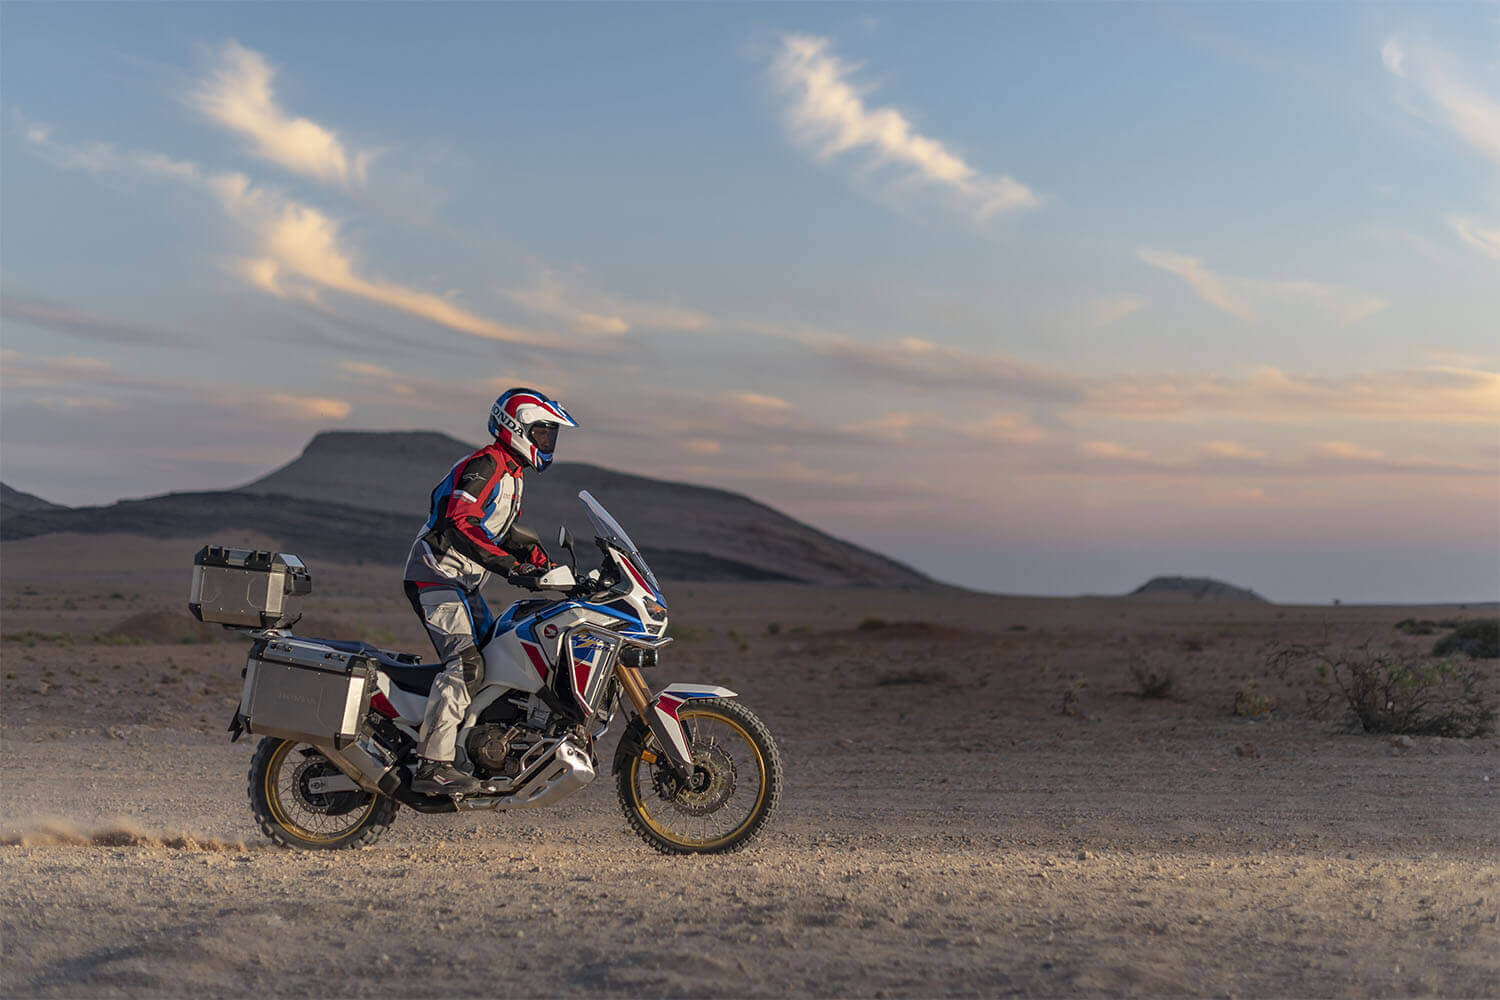 highlights of the 2021 Honda Africa Twin